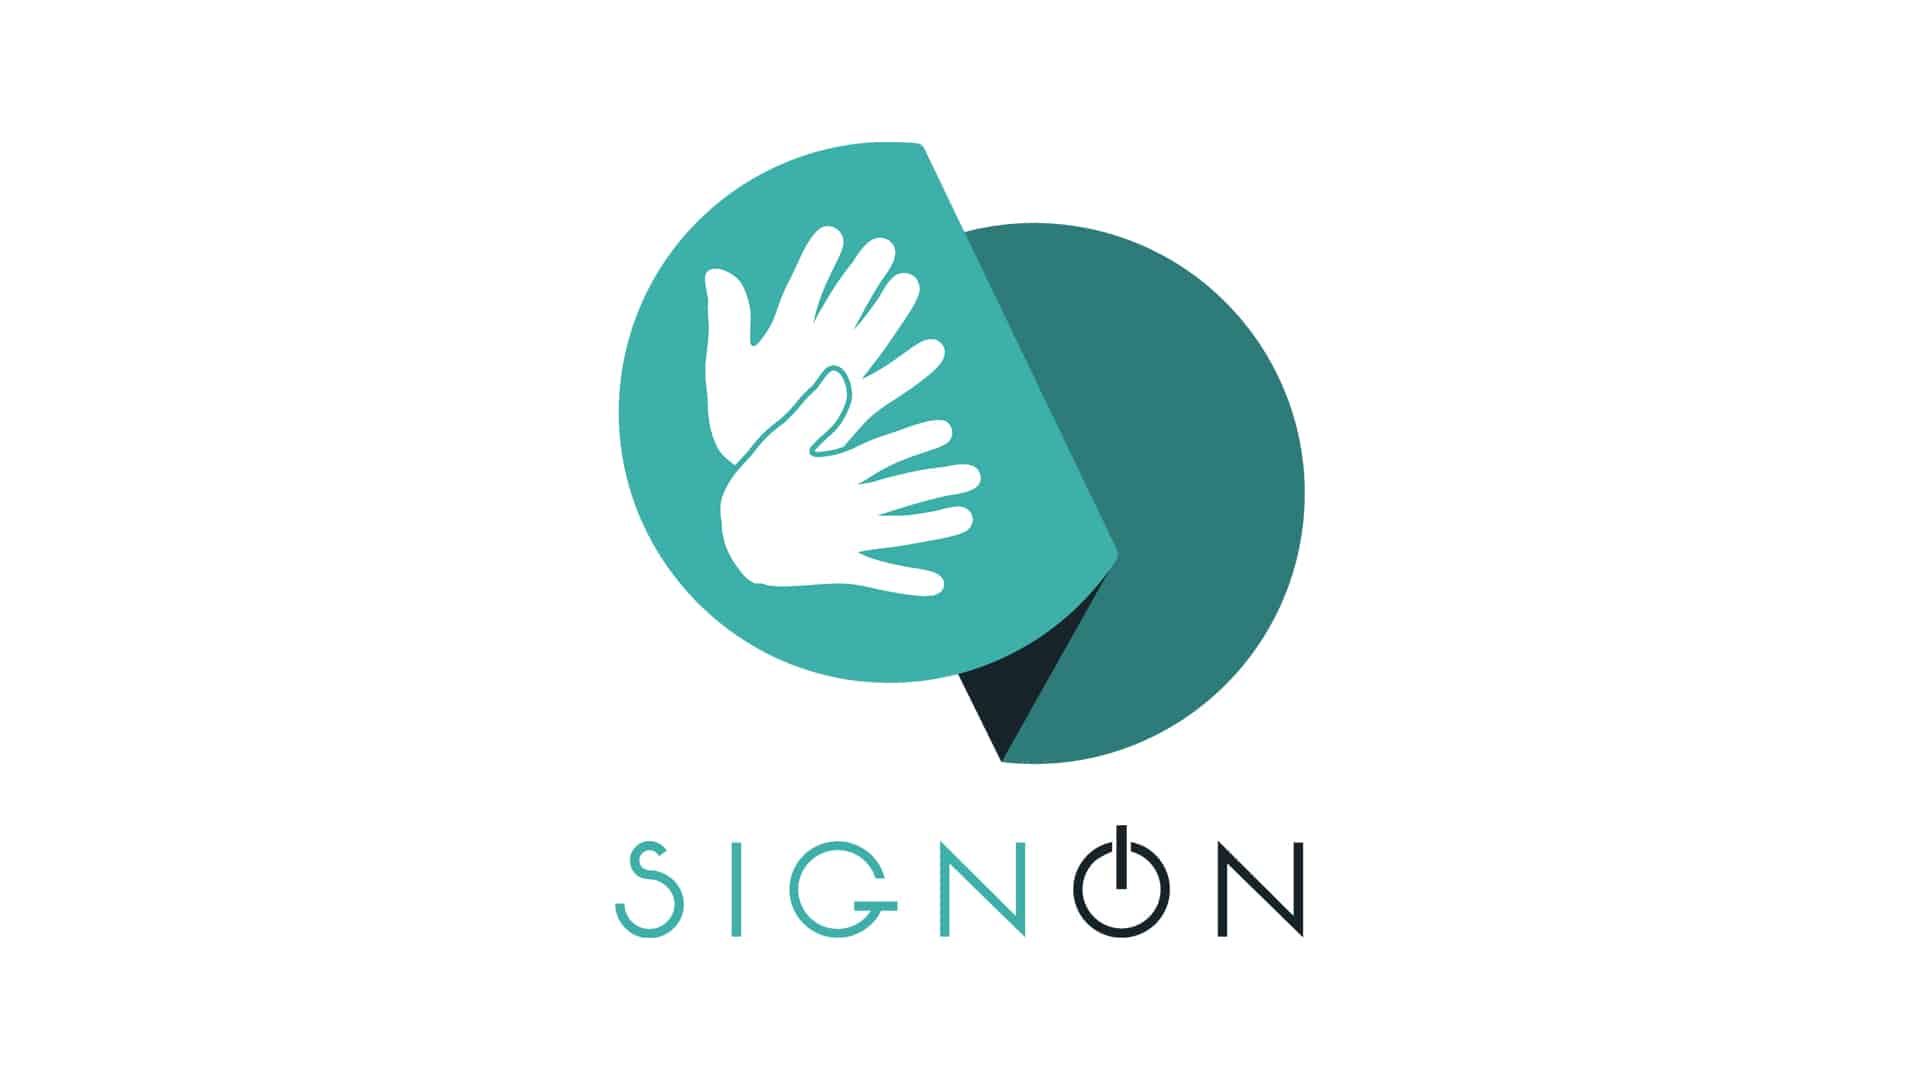 The SignON Project